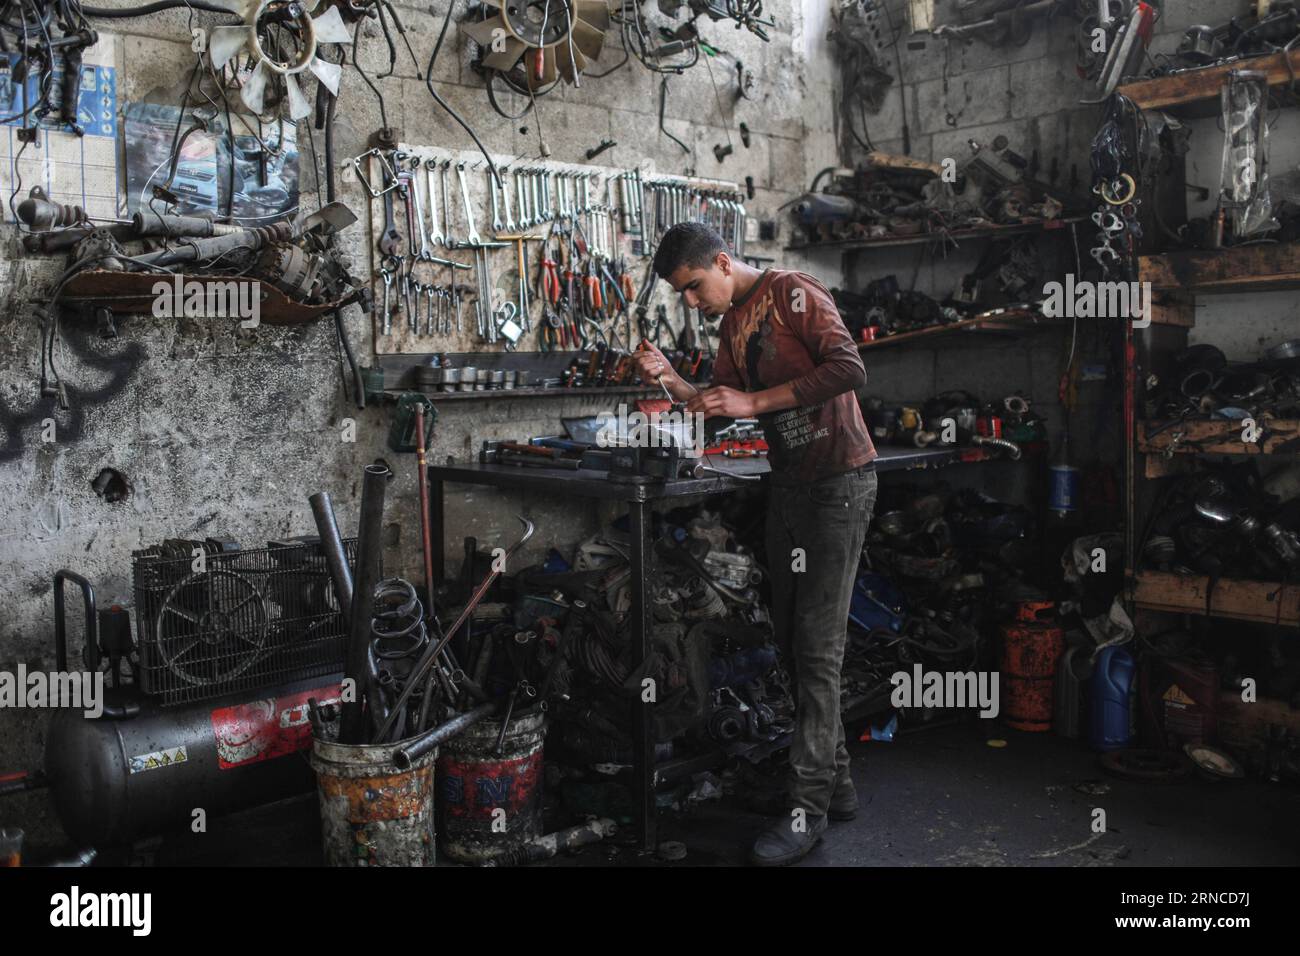 (160405) -- GAZA, April 5, 2016 -- Palestinian boy Debes Talateni, 13, who works as a mechanic to help his father support their family is seen at a garage in Gaza City on April 5, 2016. Many Palestinian young boys are trying to make a living and support their family. ) MIDEAST-GAZA-PALESTINIAN-CHILD WissamxNassar PUBLICATIONxNOTxINxCHN   Gaza April 5 2016 PALESTINIAN Boy Debes  13 Who Works As a Mechanic to Help His Father Support their Family IS Lakes AT a Garage in Gaza City ON April 5 2016 MANY PALESTINIAN Young Boys are trying to Make a Living and Support their Family Mideast Gaza PALESTIN Stock Photo